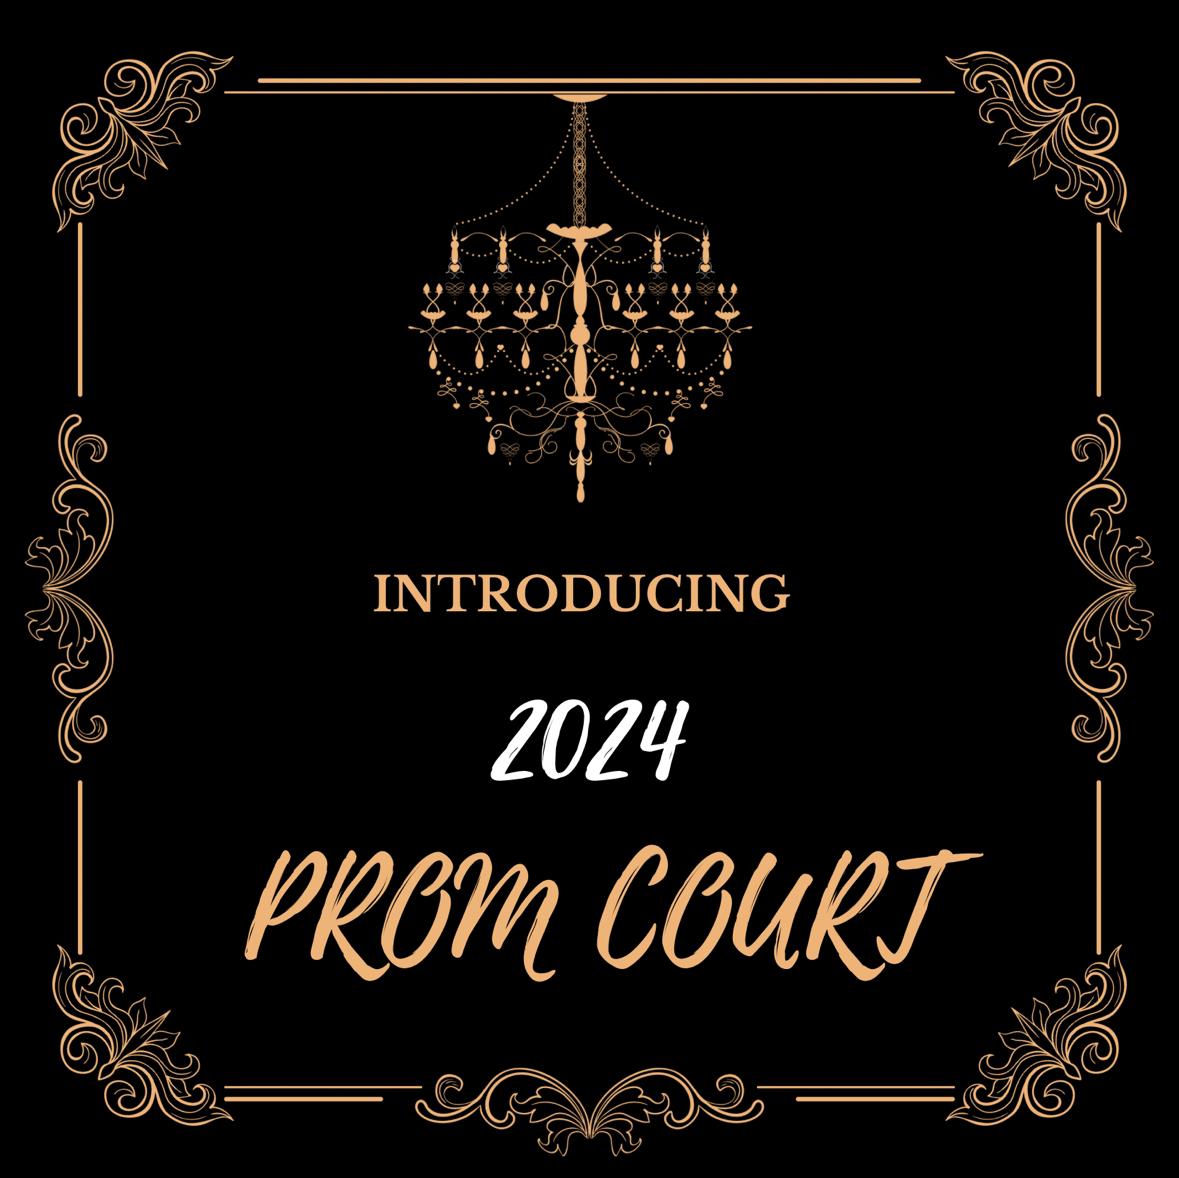 Prom court gives seniors the opportunity to fulfill the ideal high school experience, allowing candidates to promote what theyve accomplished throughout high school. Seniors Anicia Toscano, Katie Castillo, Maui Tagle, Ashley Carmouche, Analisa Soriano, Daniel Carrillo, Dominic Sanchez, Matthew Vasquez, Daniel Zelaya, and Nathan White are the 2024 prom court candidates. Online voting will open this Friday and will be open to all grades to vote for one of each gender. Prom Queen and King will be announced at prom on Saturday. 